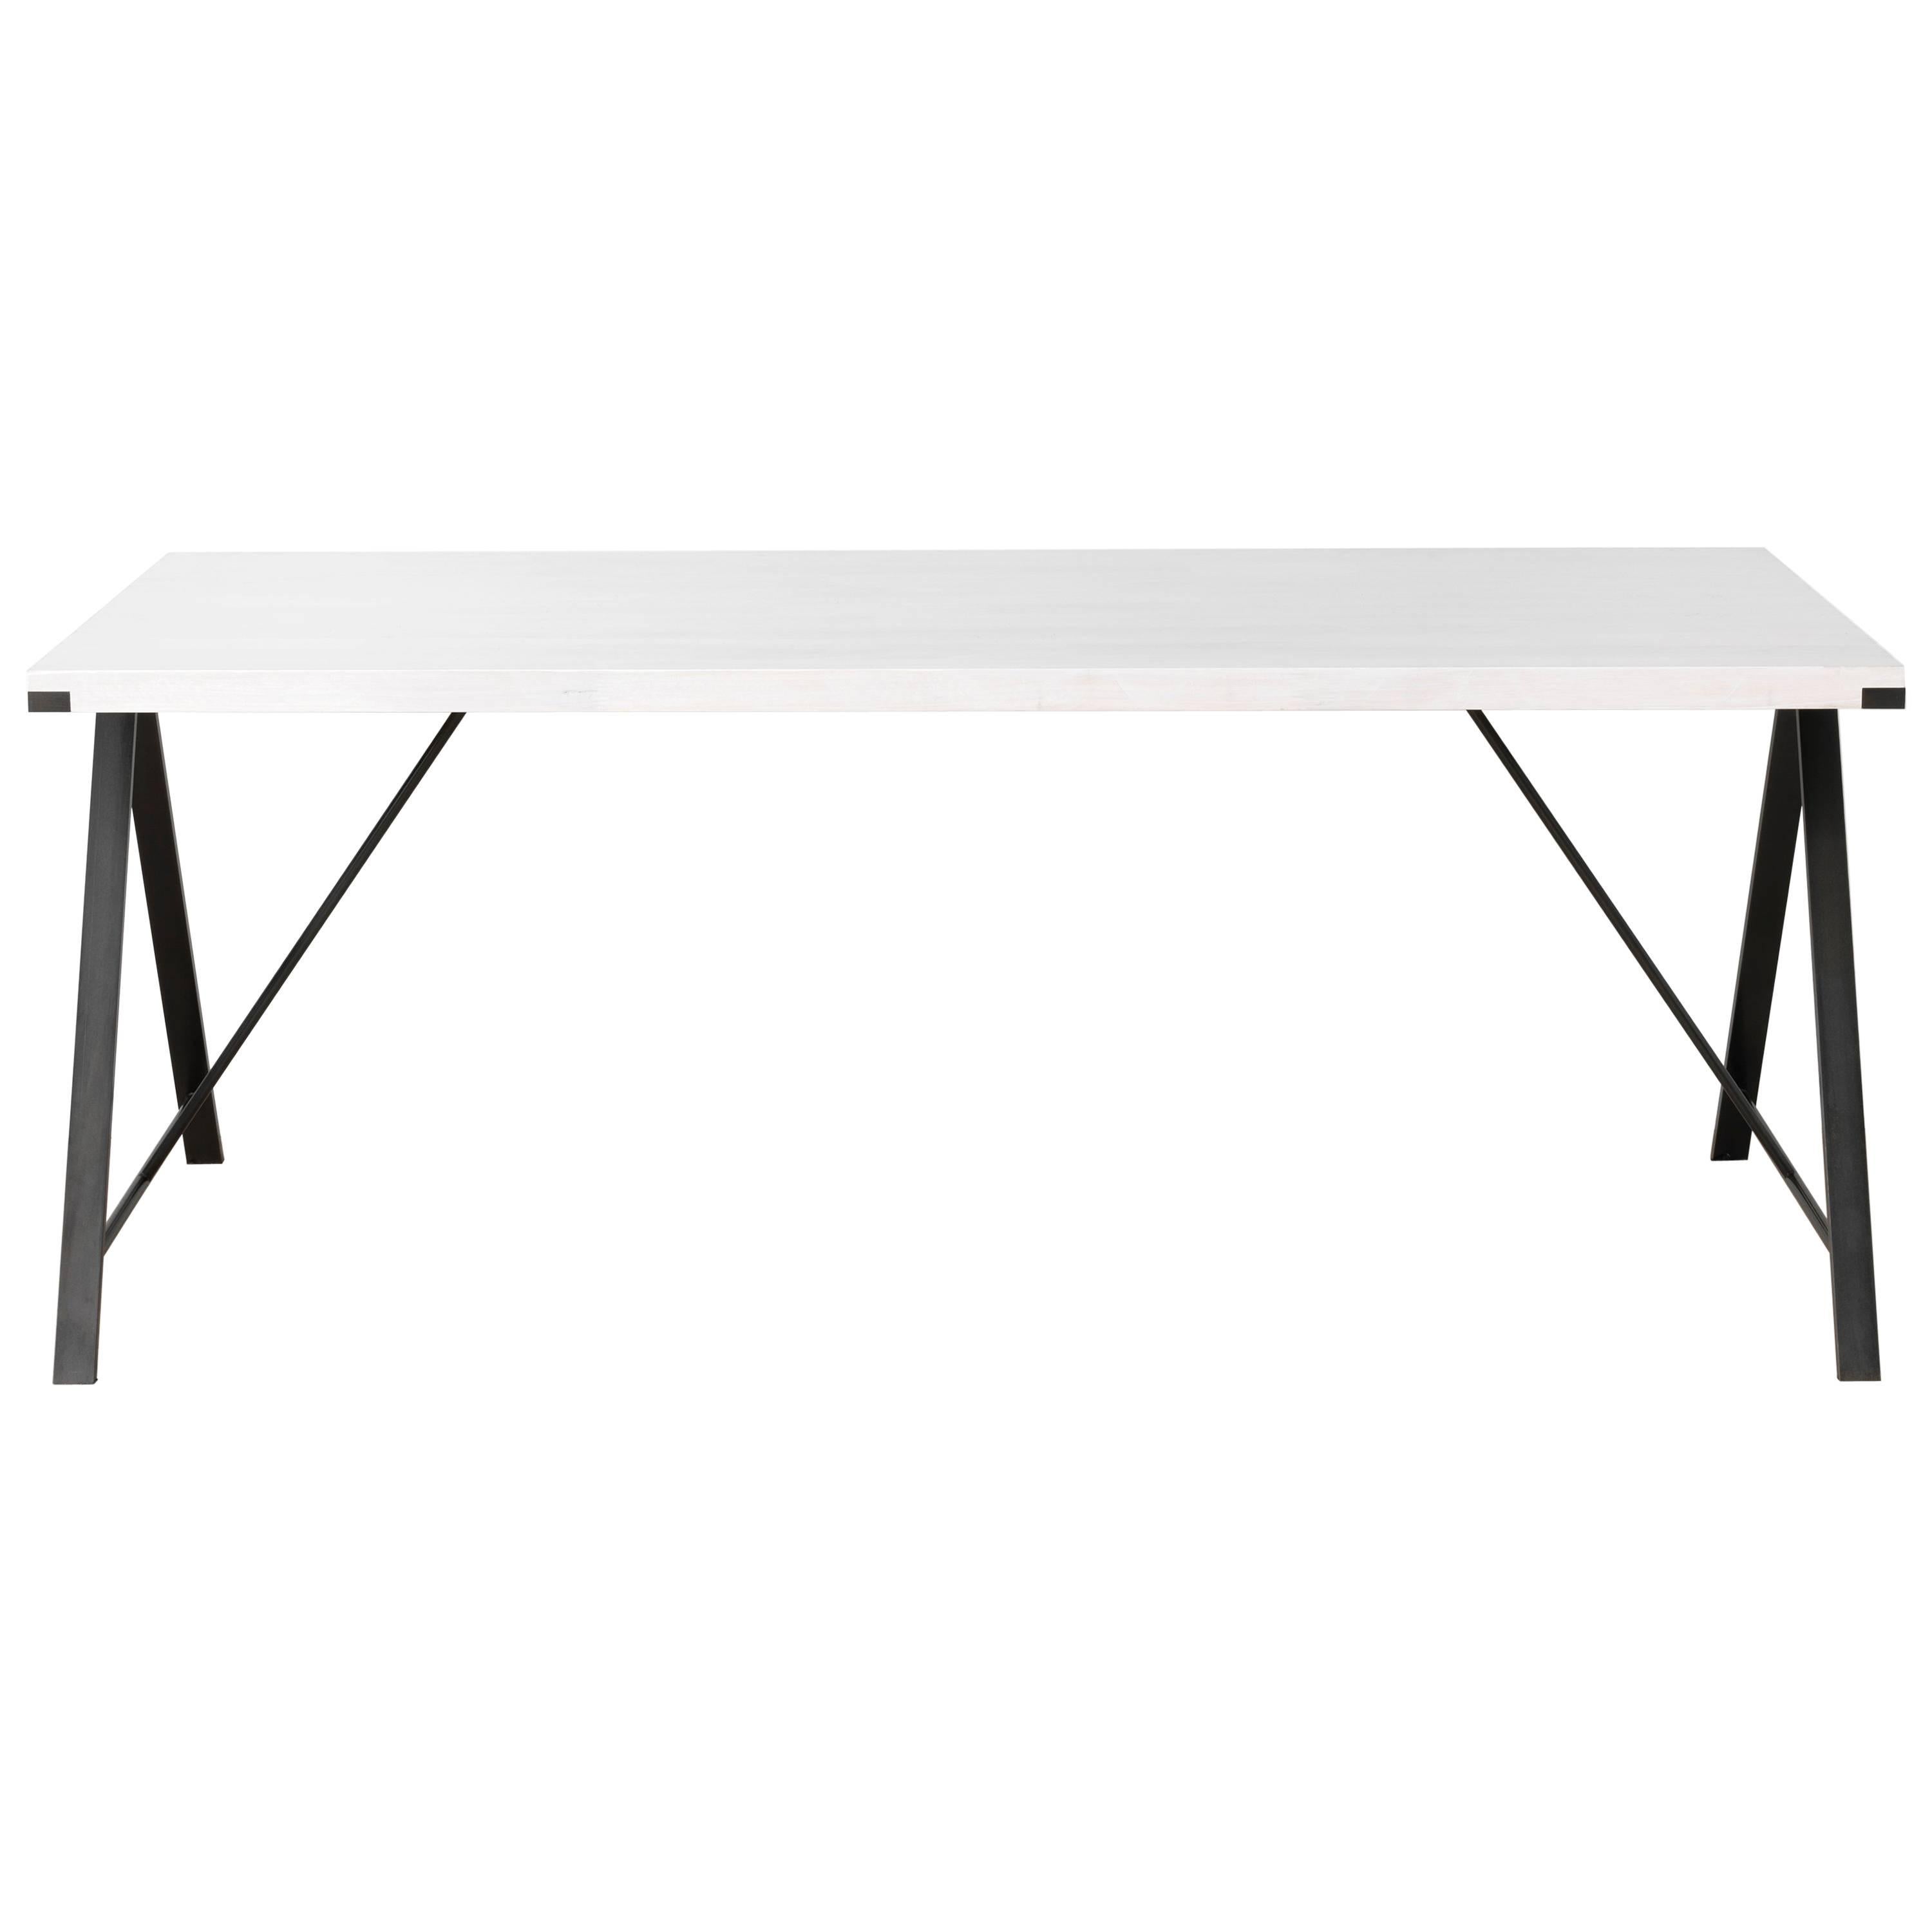 A-Table in Contemporary Blackened Steel and White Washed Maple For Sale